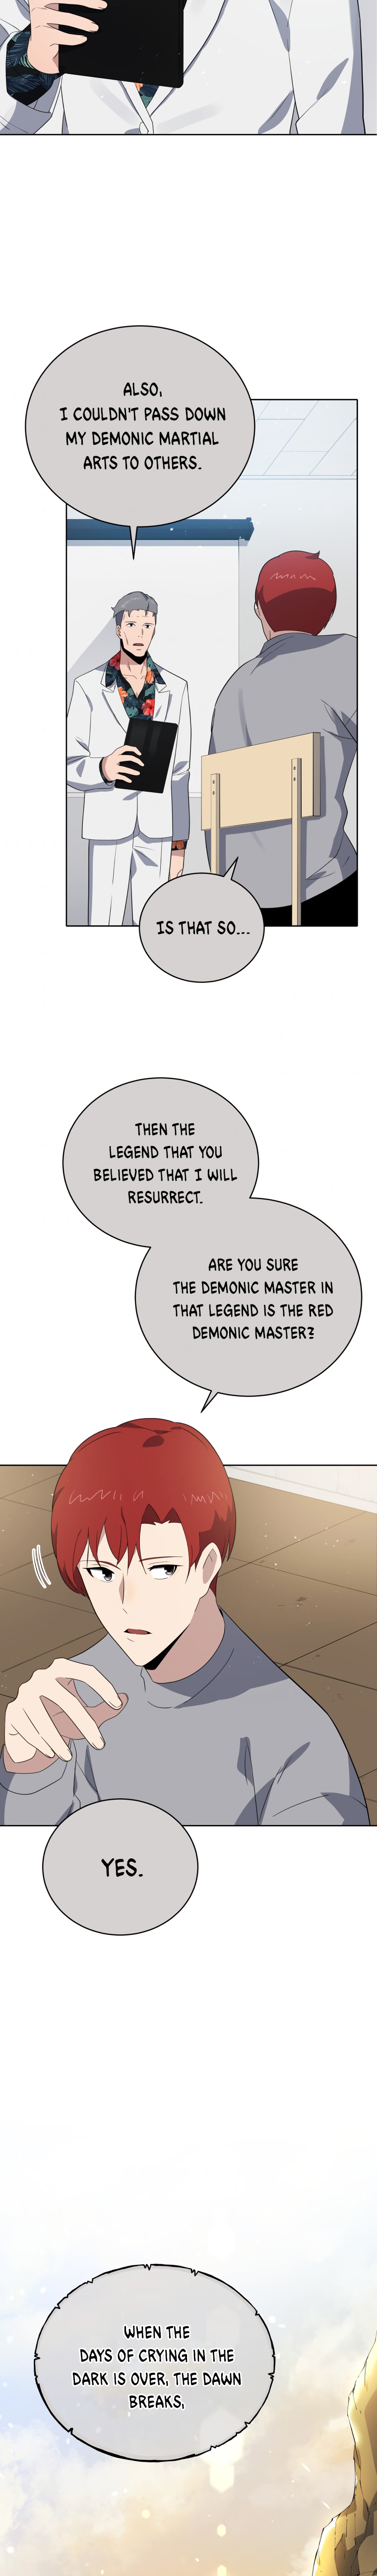 the descent of the demonic master Chapter 133